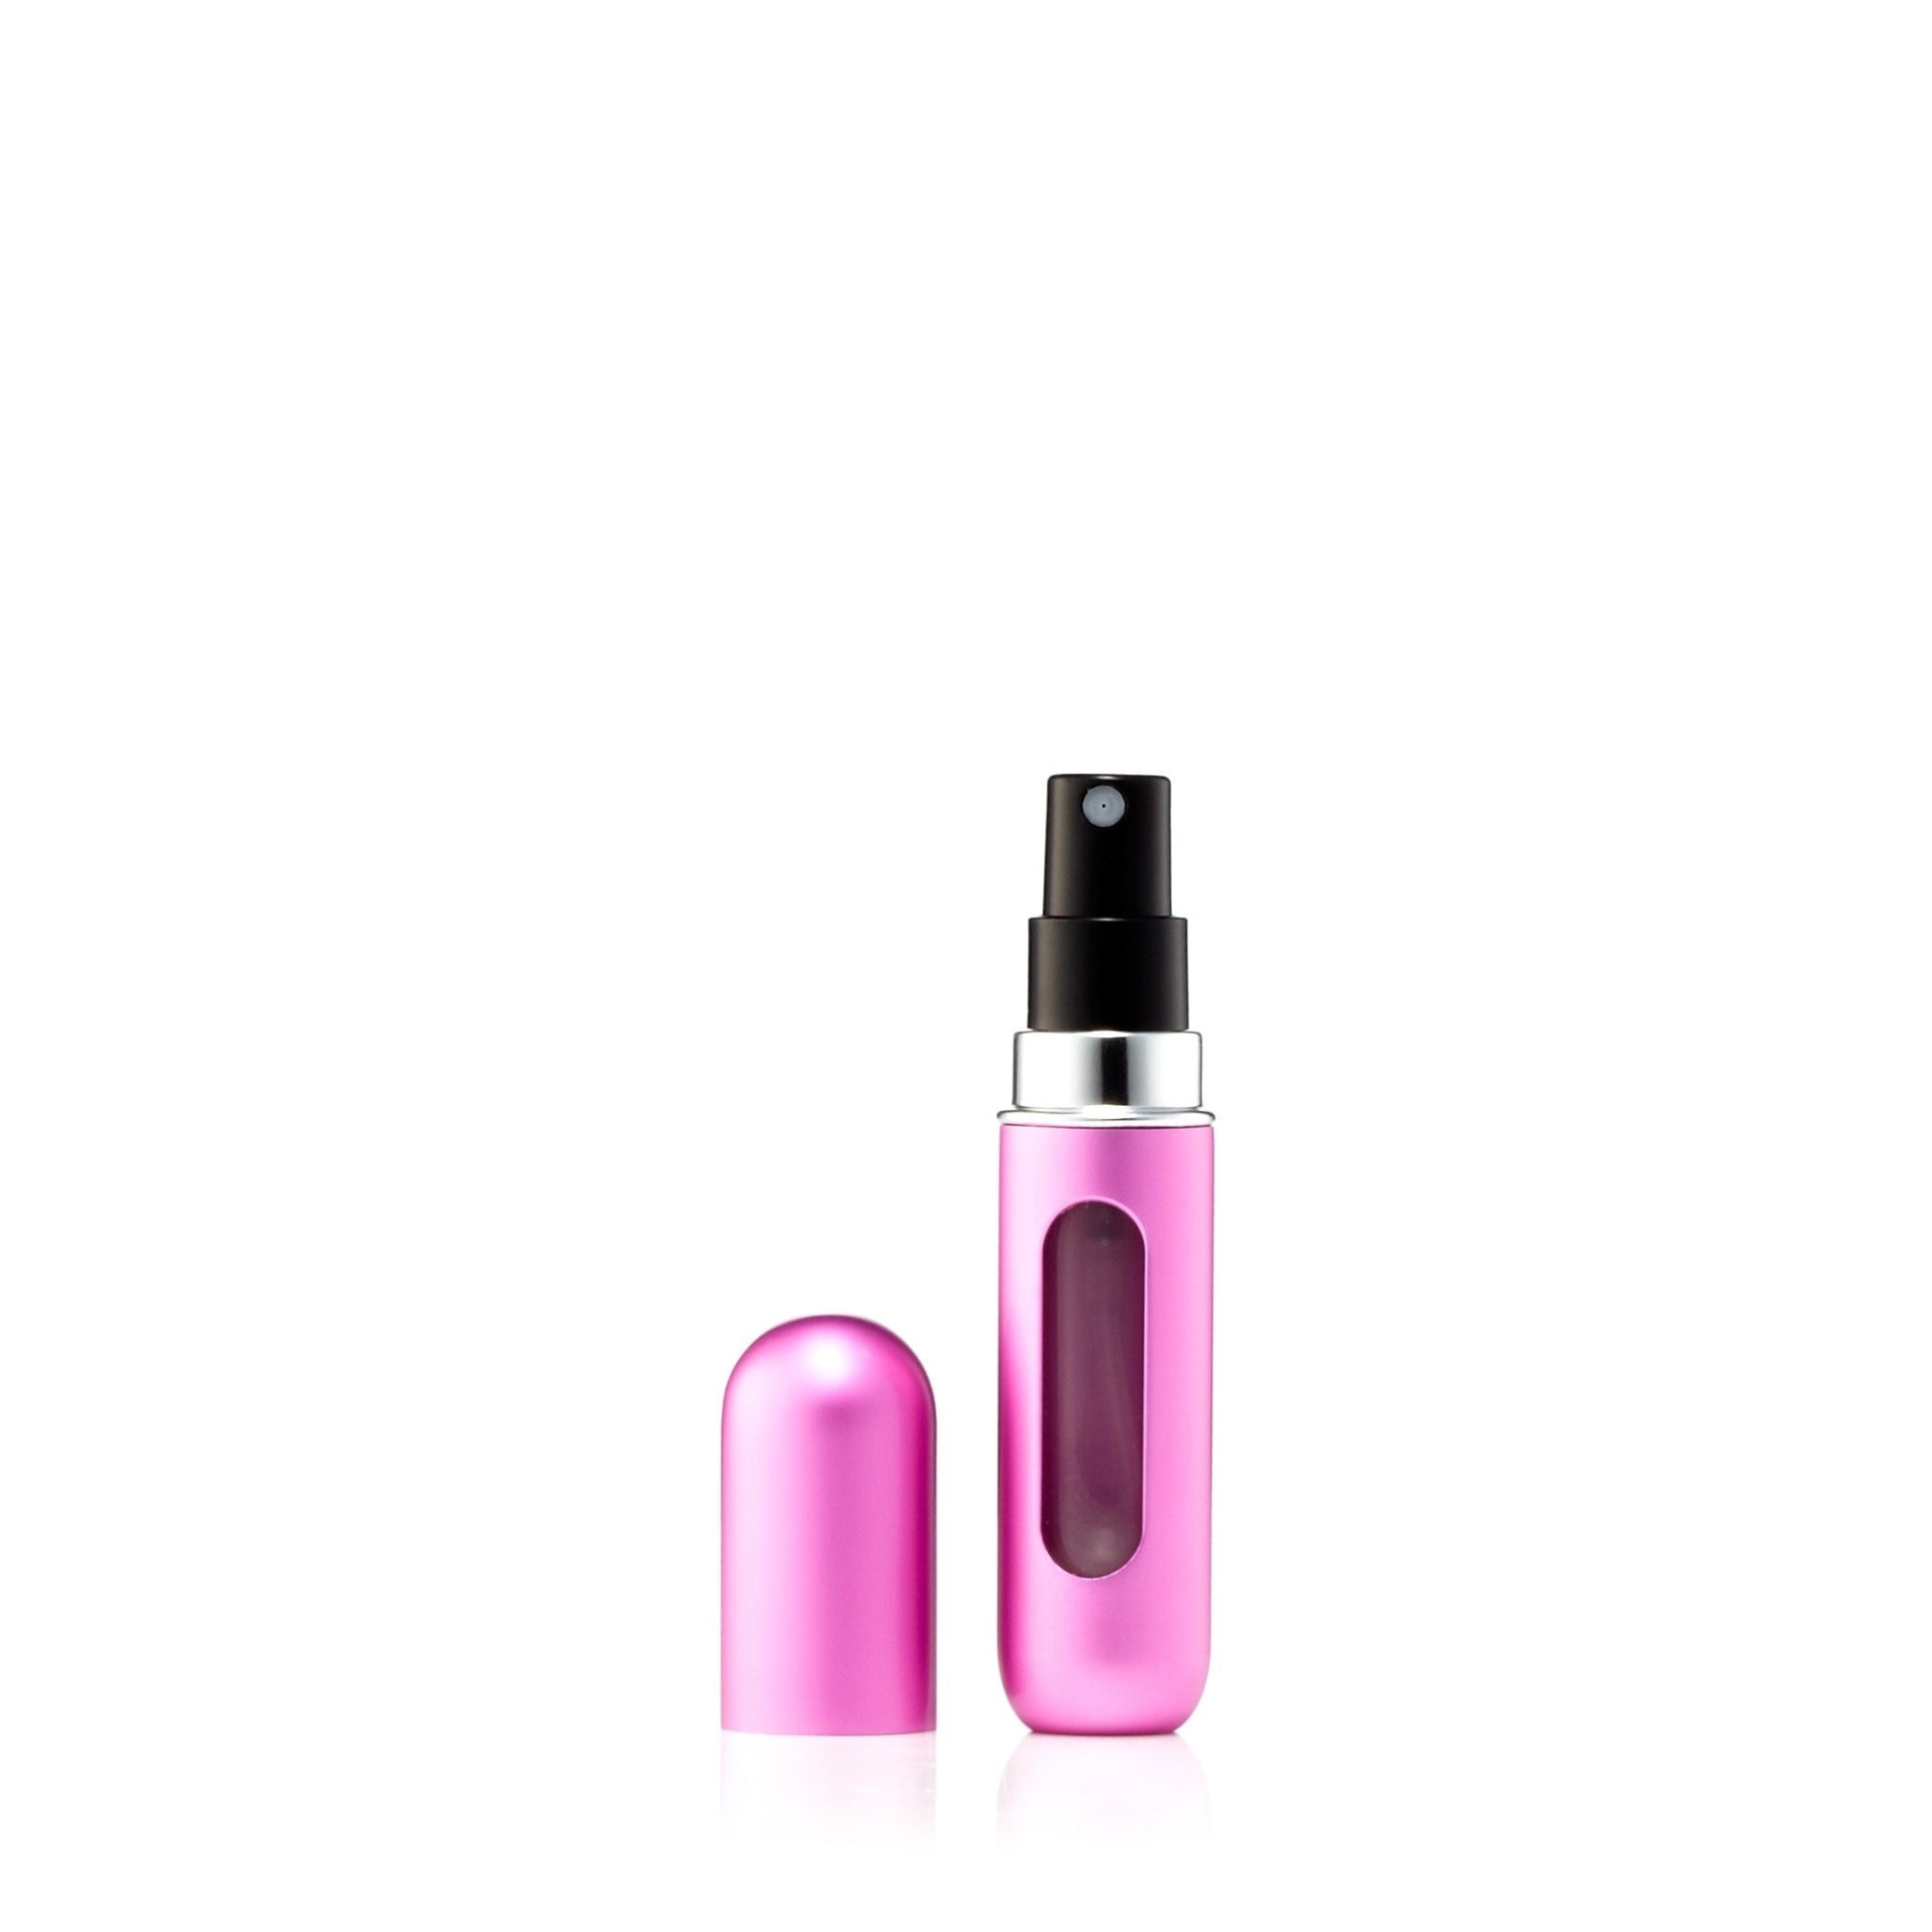 Travalo Refillable Fragrance Spray Atomizer Atomizer Unisex Accessories Hot Pink Click to open in modal